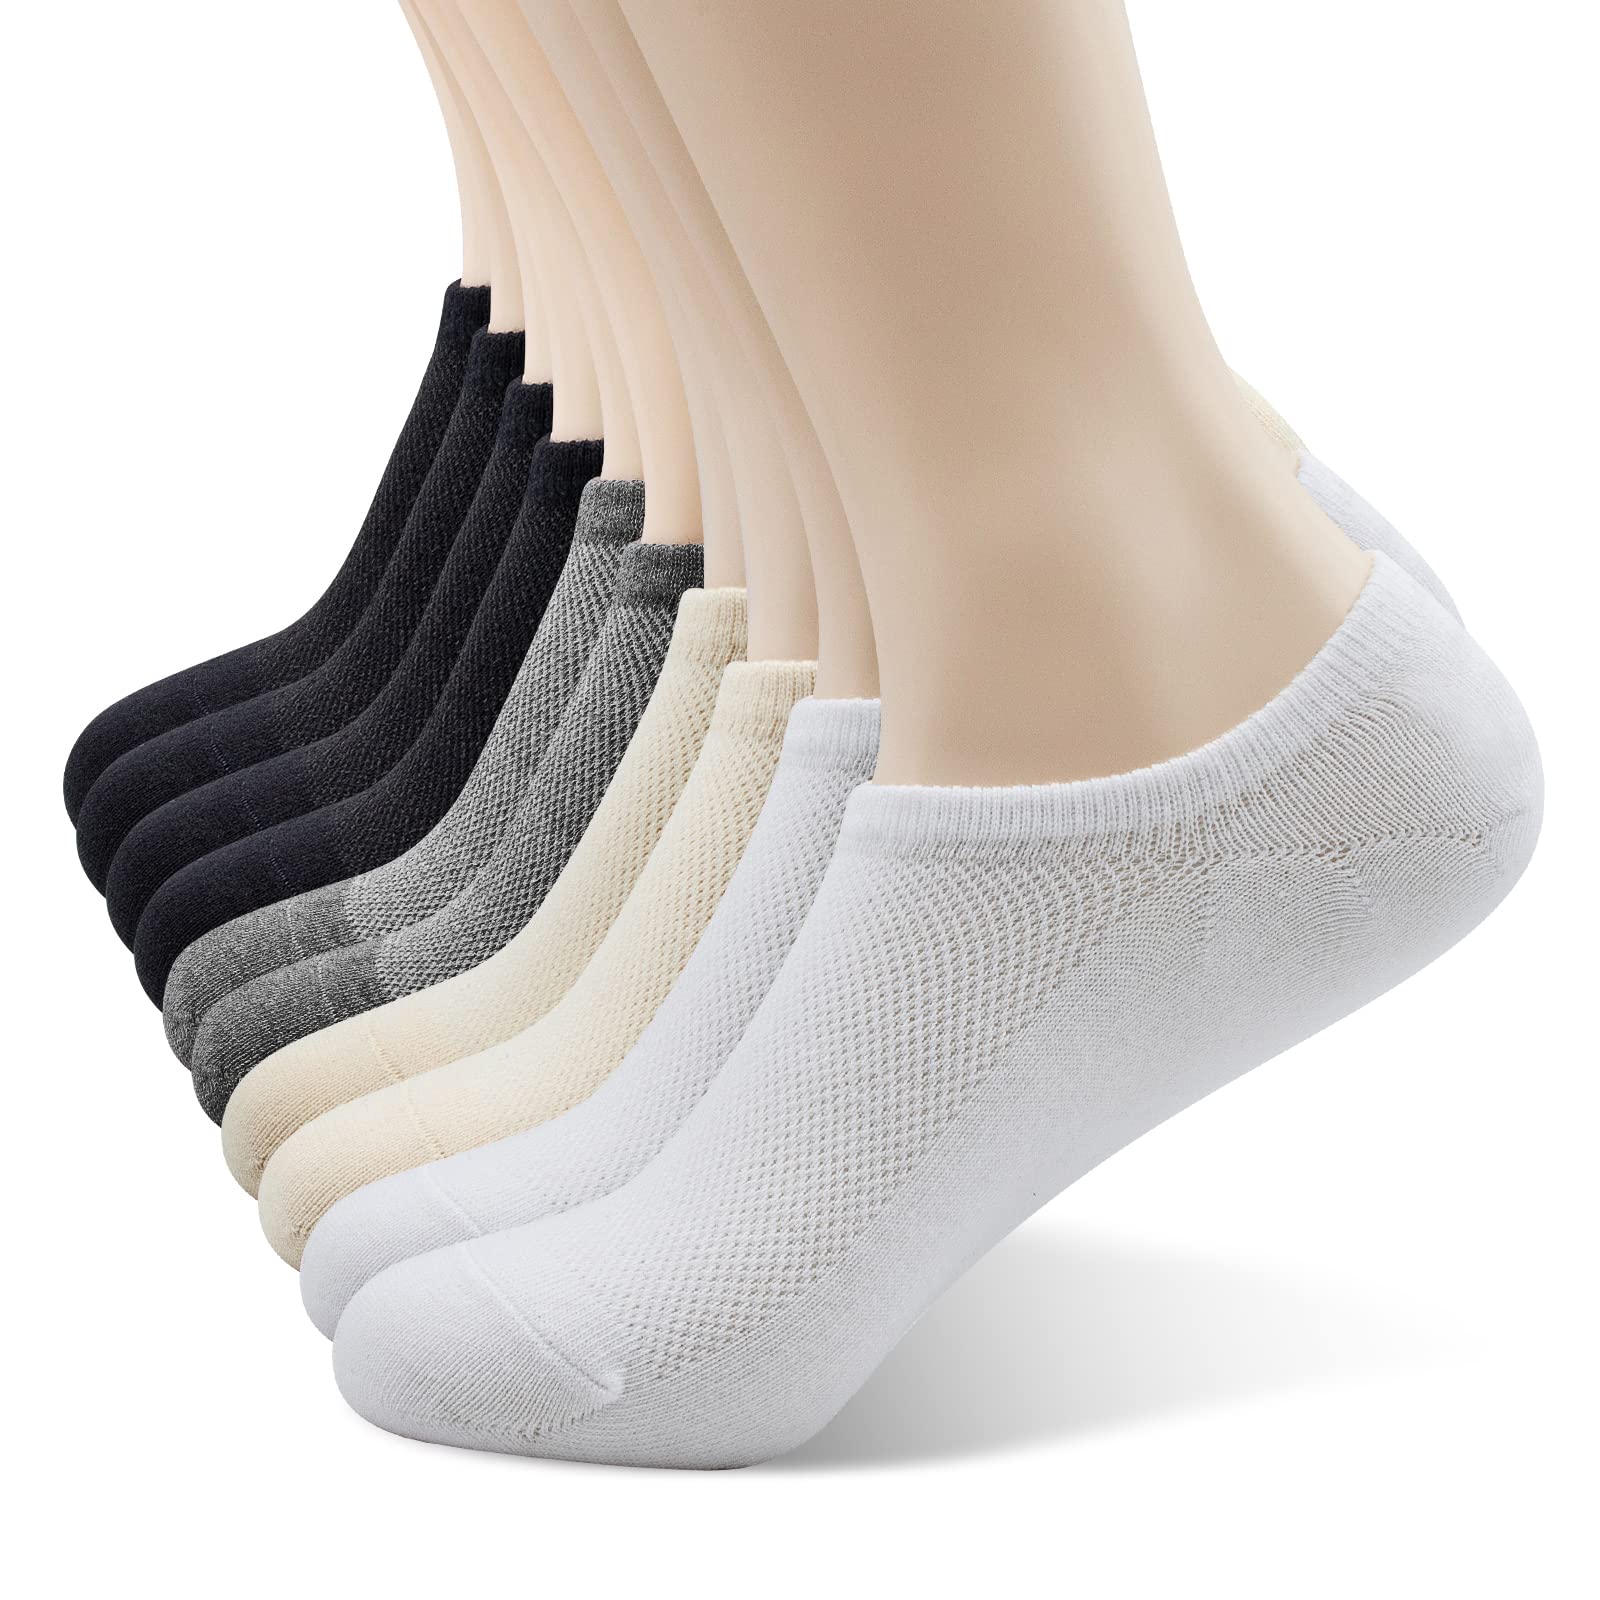 WindDancer Men’s Athletic Tab Socks with Cushion, Running Socks Breathable Comfort for Sport 2/4 Pairs